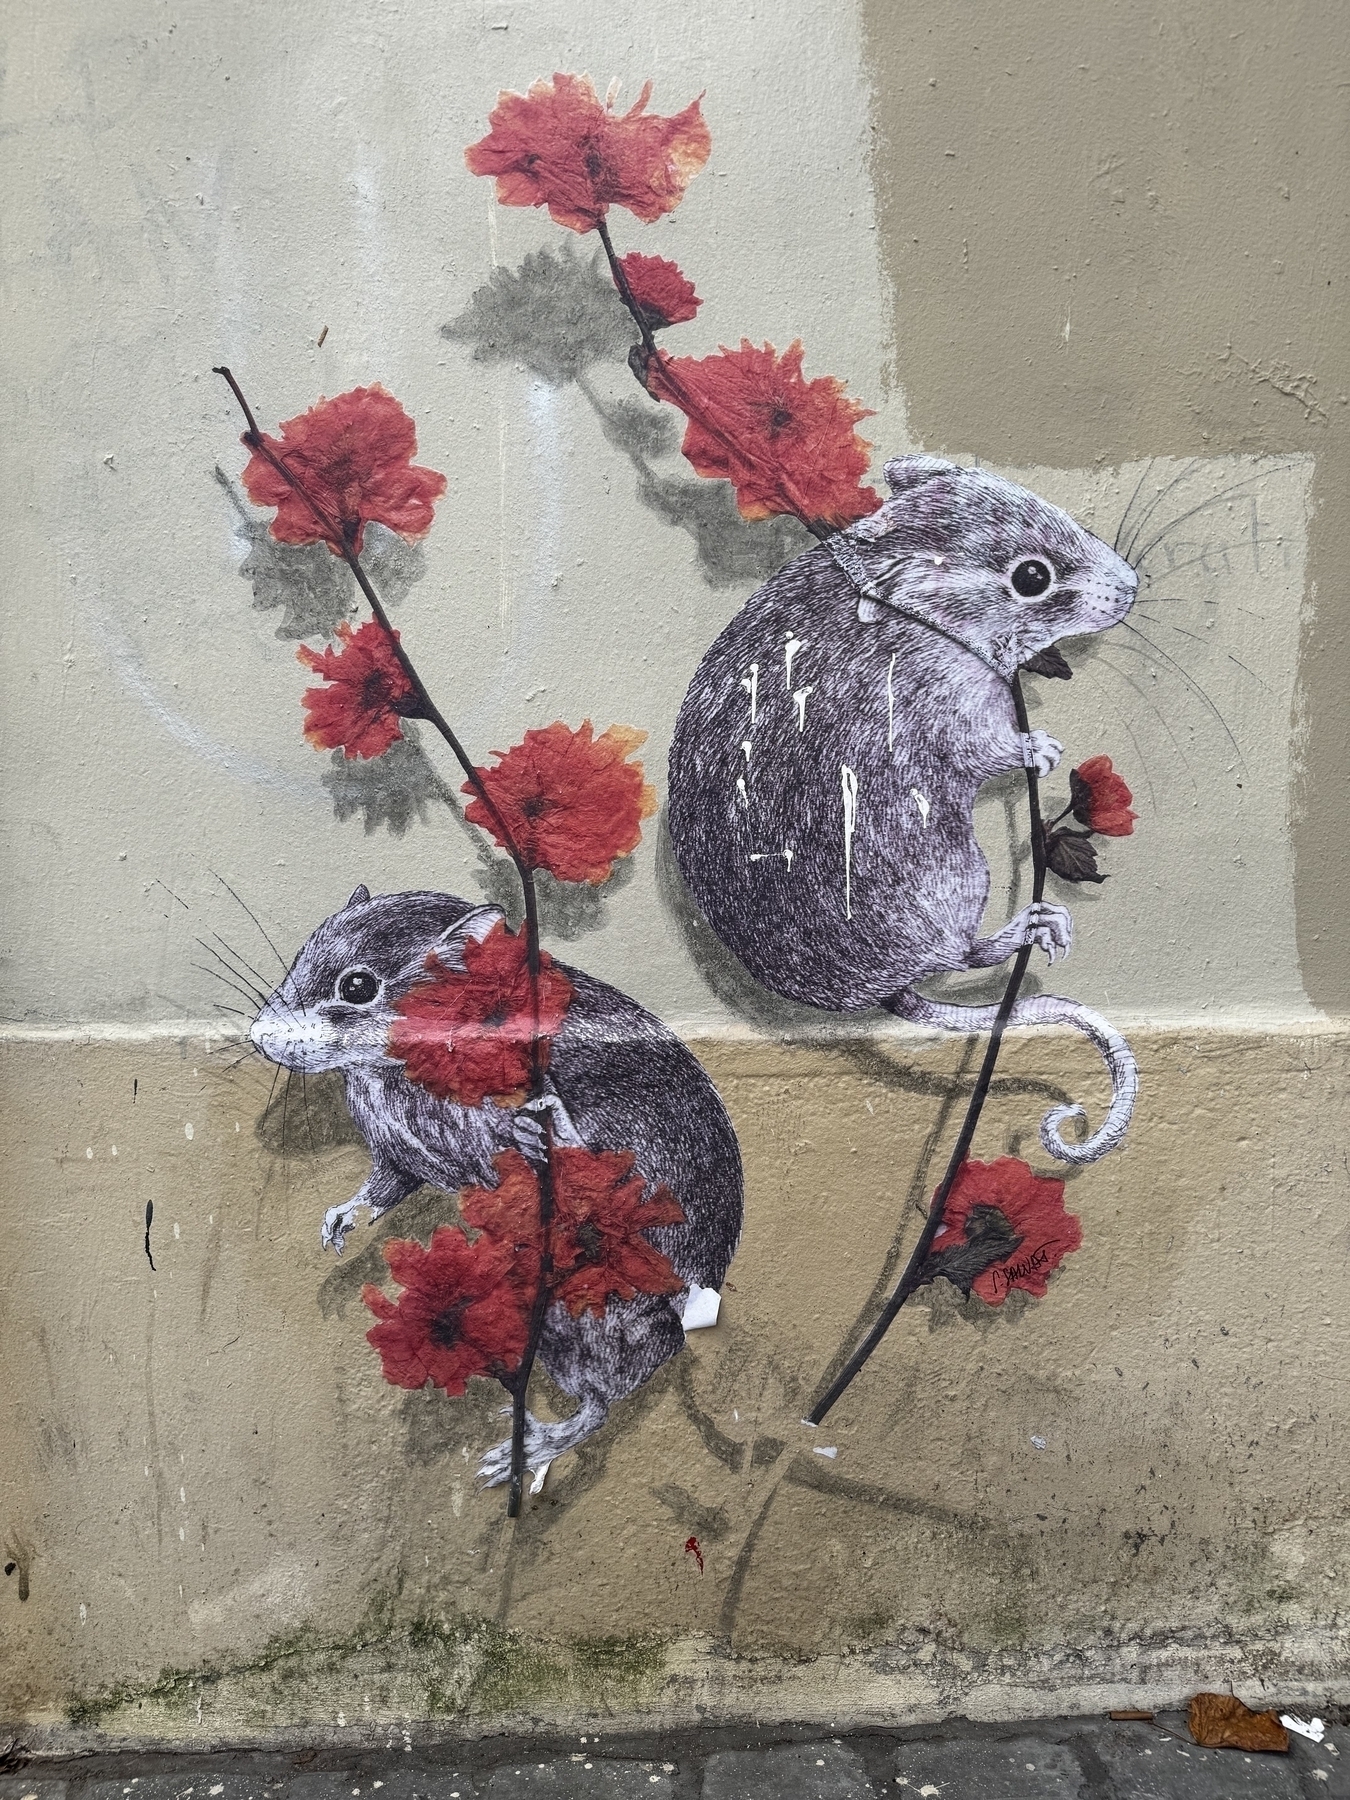 Exterior beige wall painted with two small mice clutching the stems of red flowers.